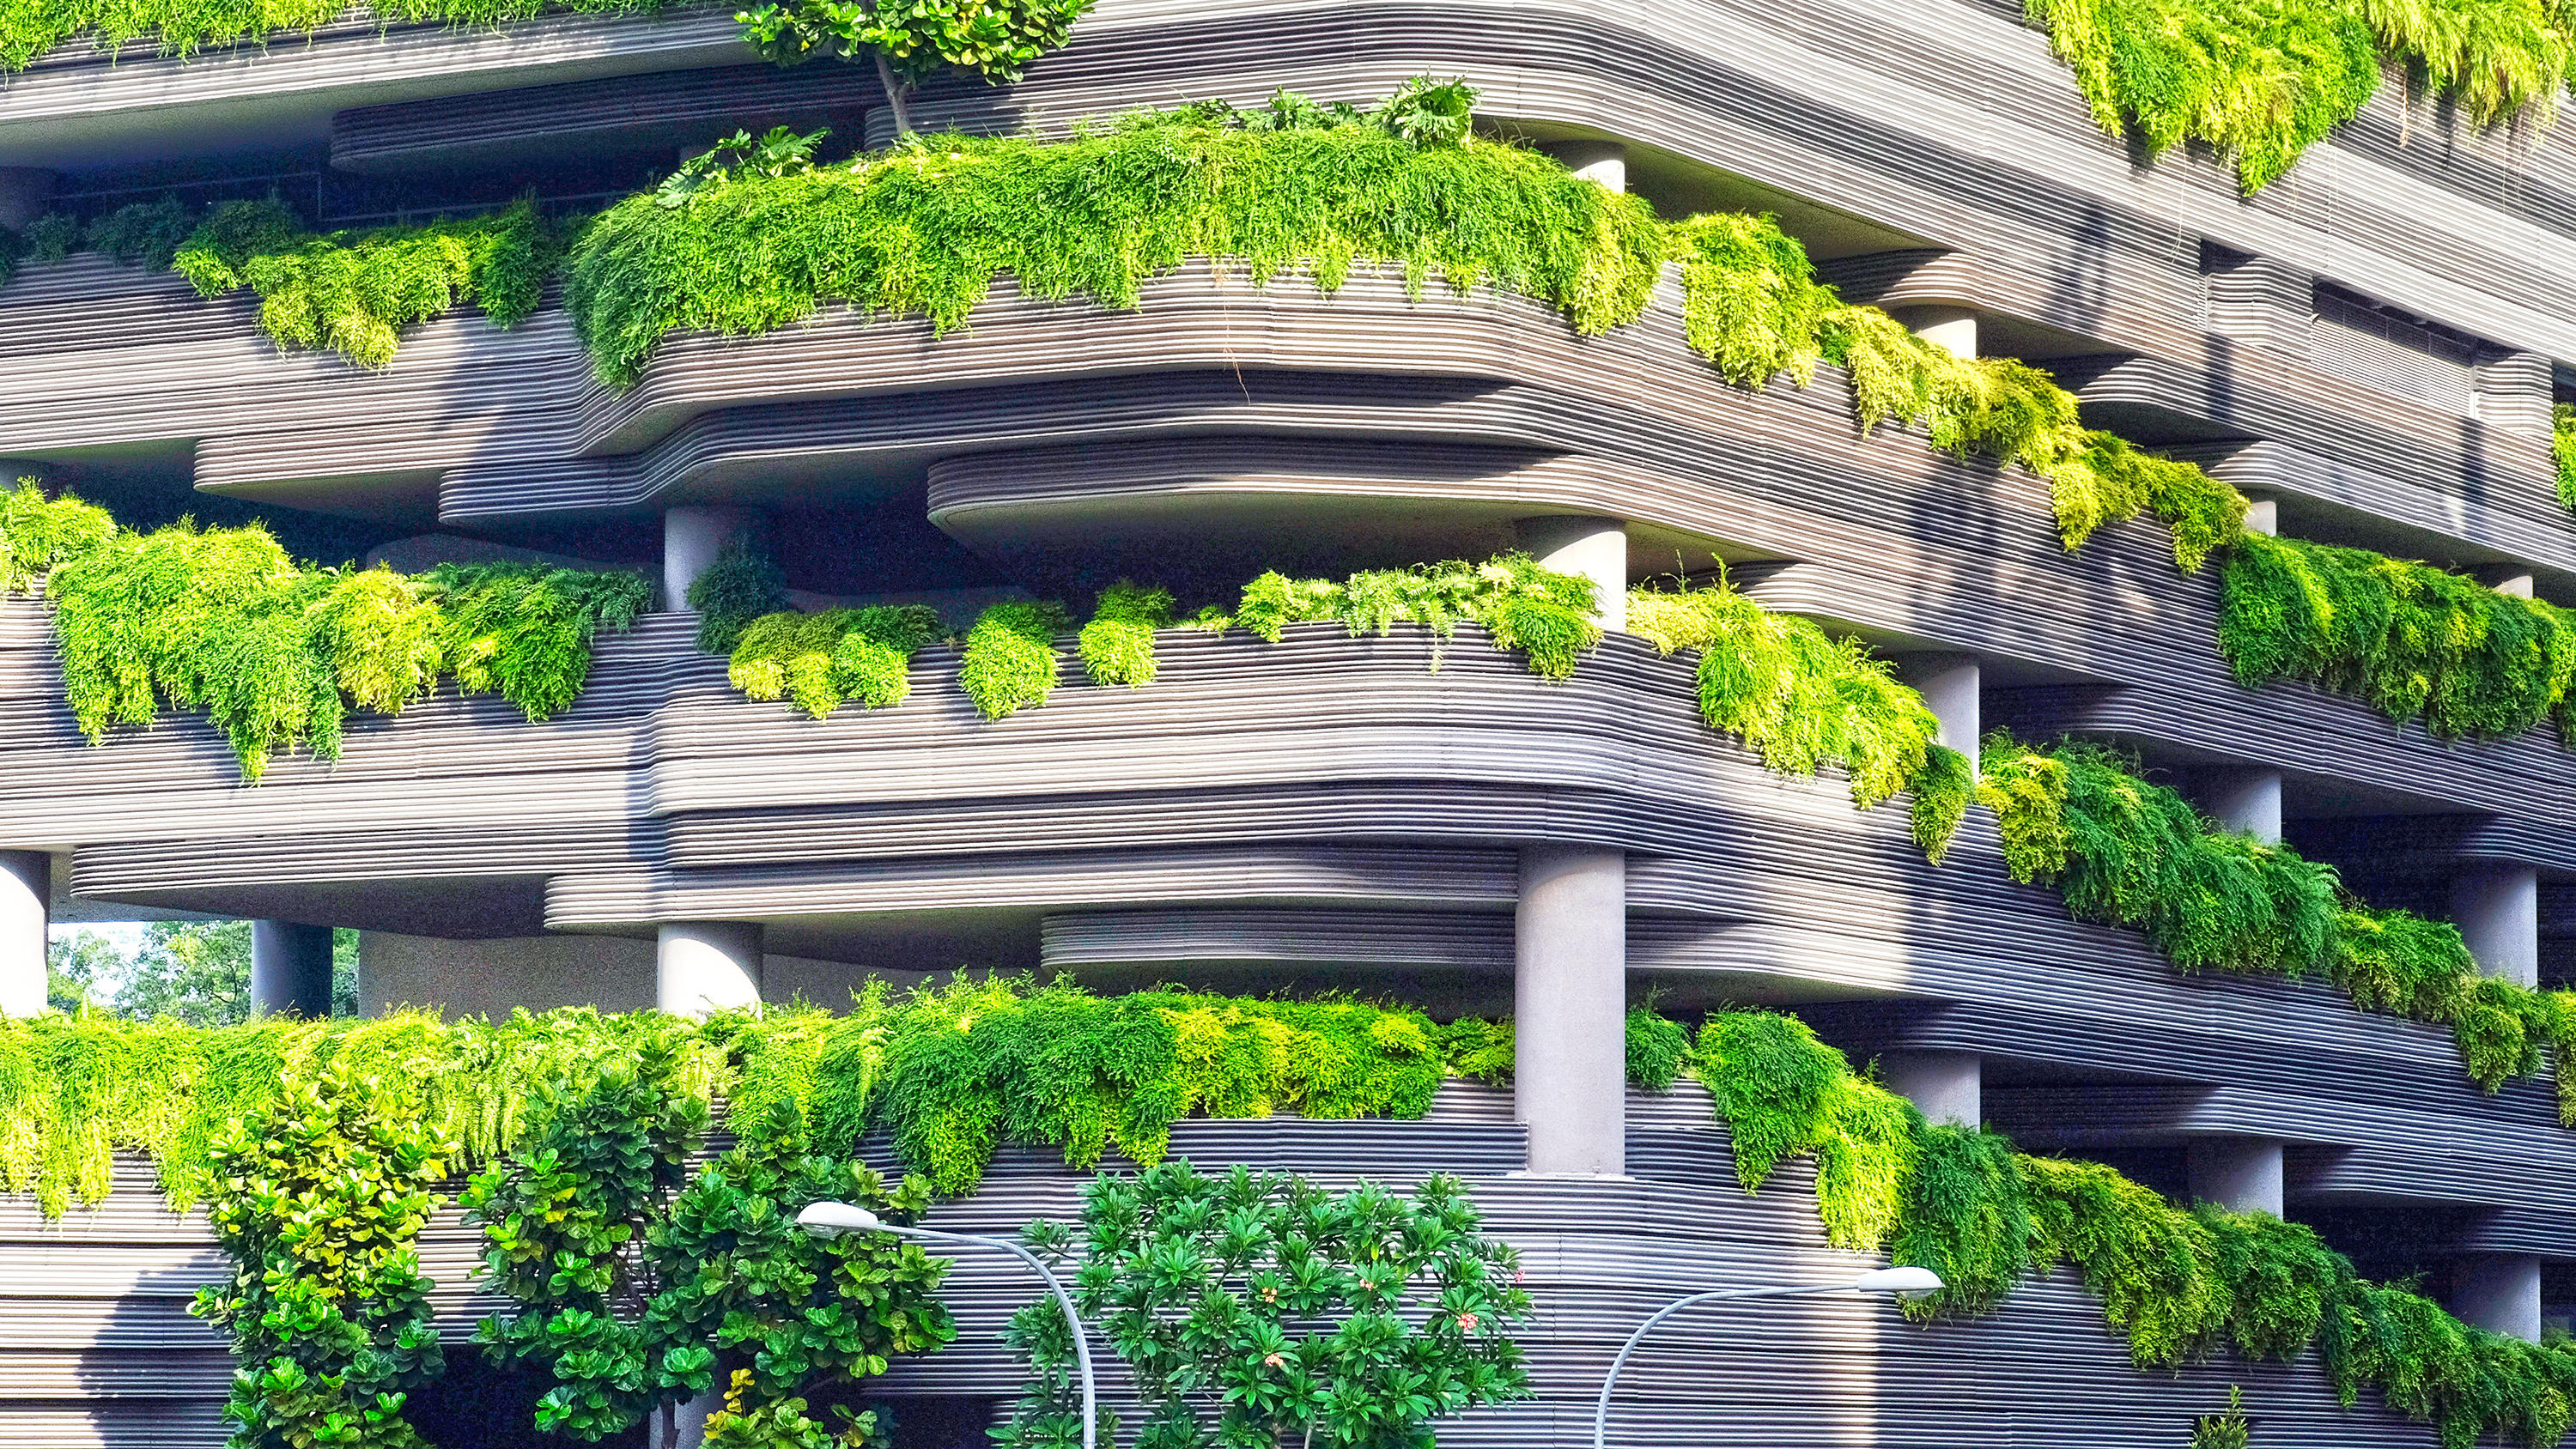 Sustainable low-carbon buildings